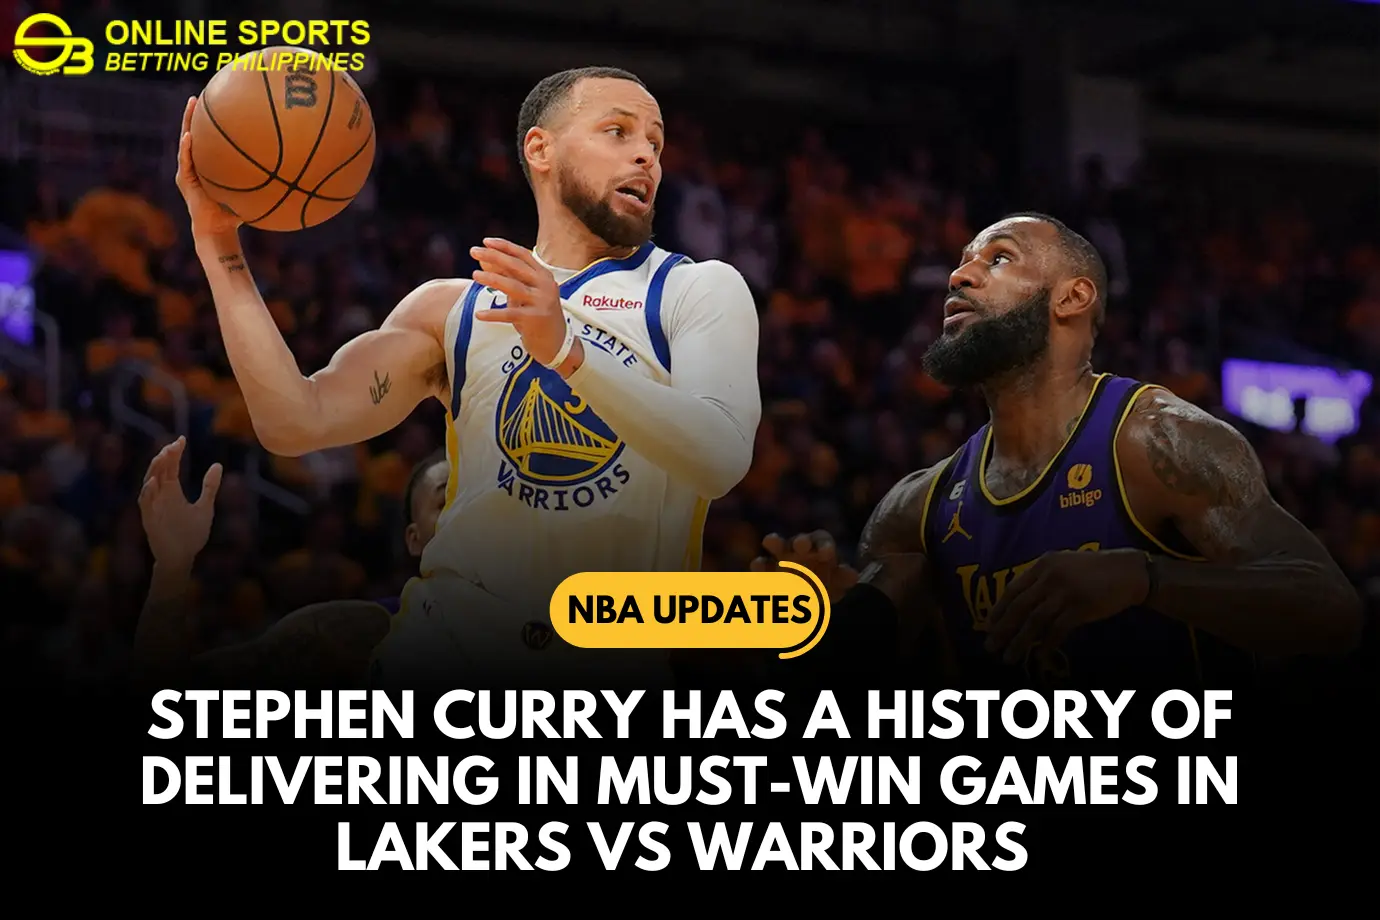 Stephen Curry has a History of Delivering in Must-Win Games in Lakers vs Warriors